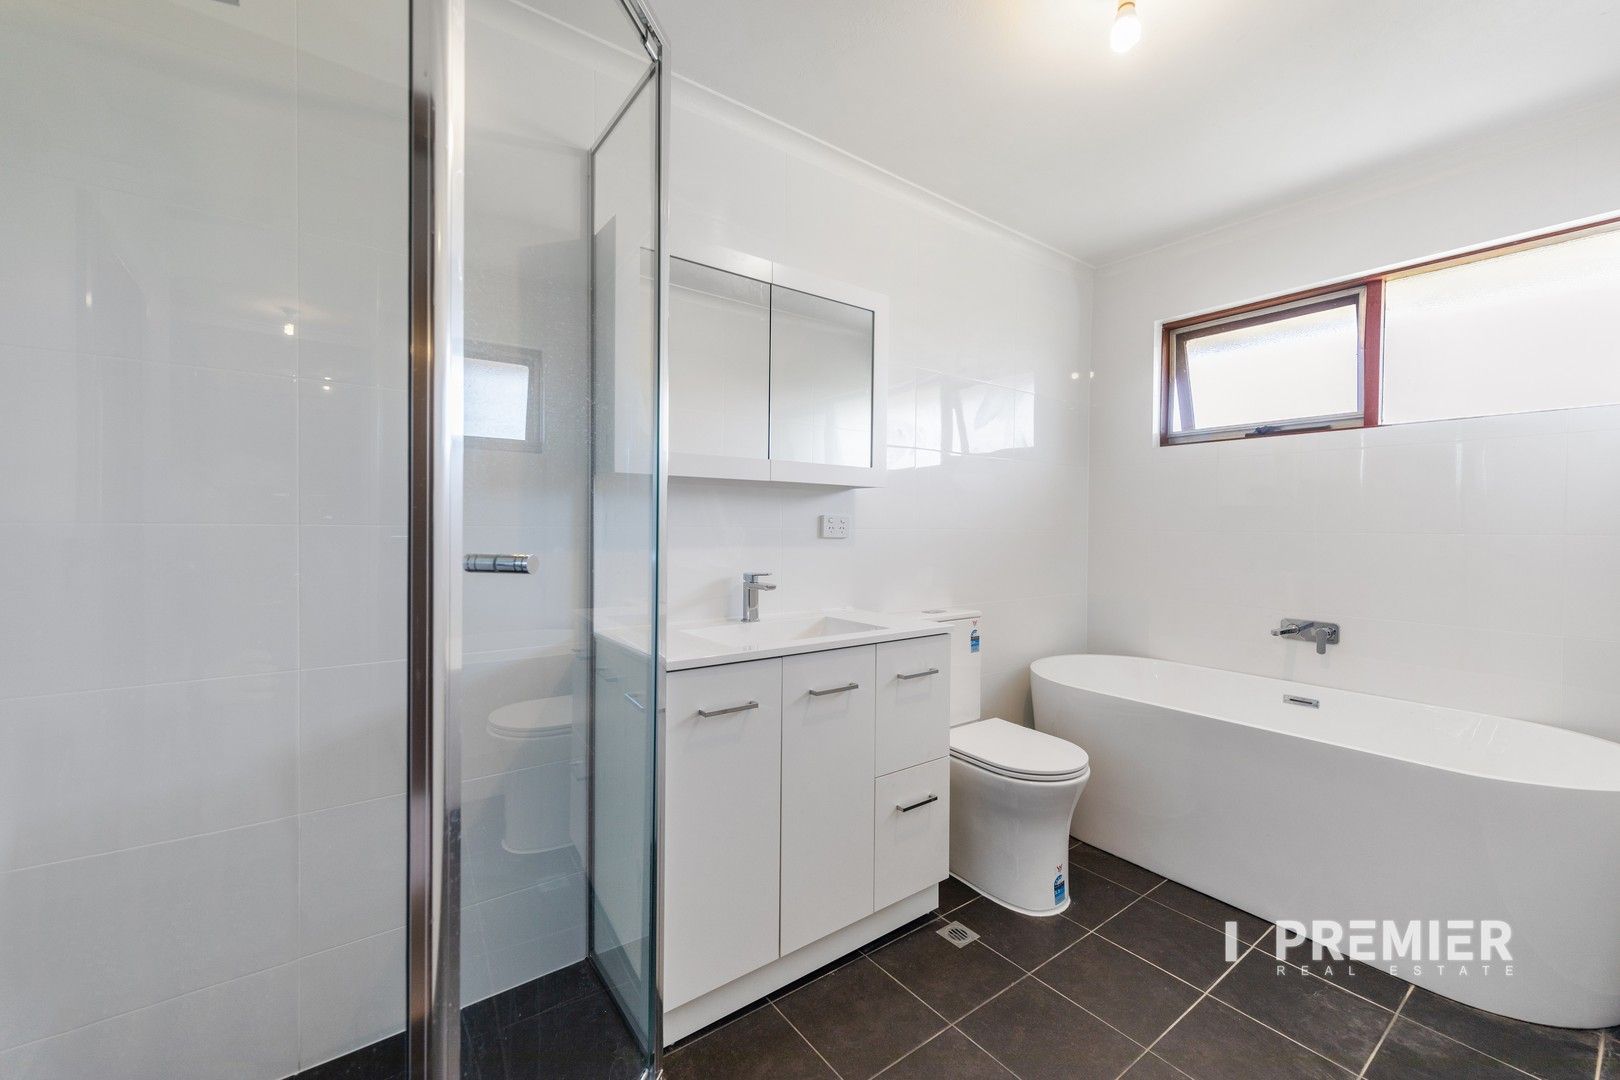 2 bedrooms Apartment / Unit / Flat in 16 Simpson Ave QUEENSTOWN SA, 5014